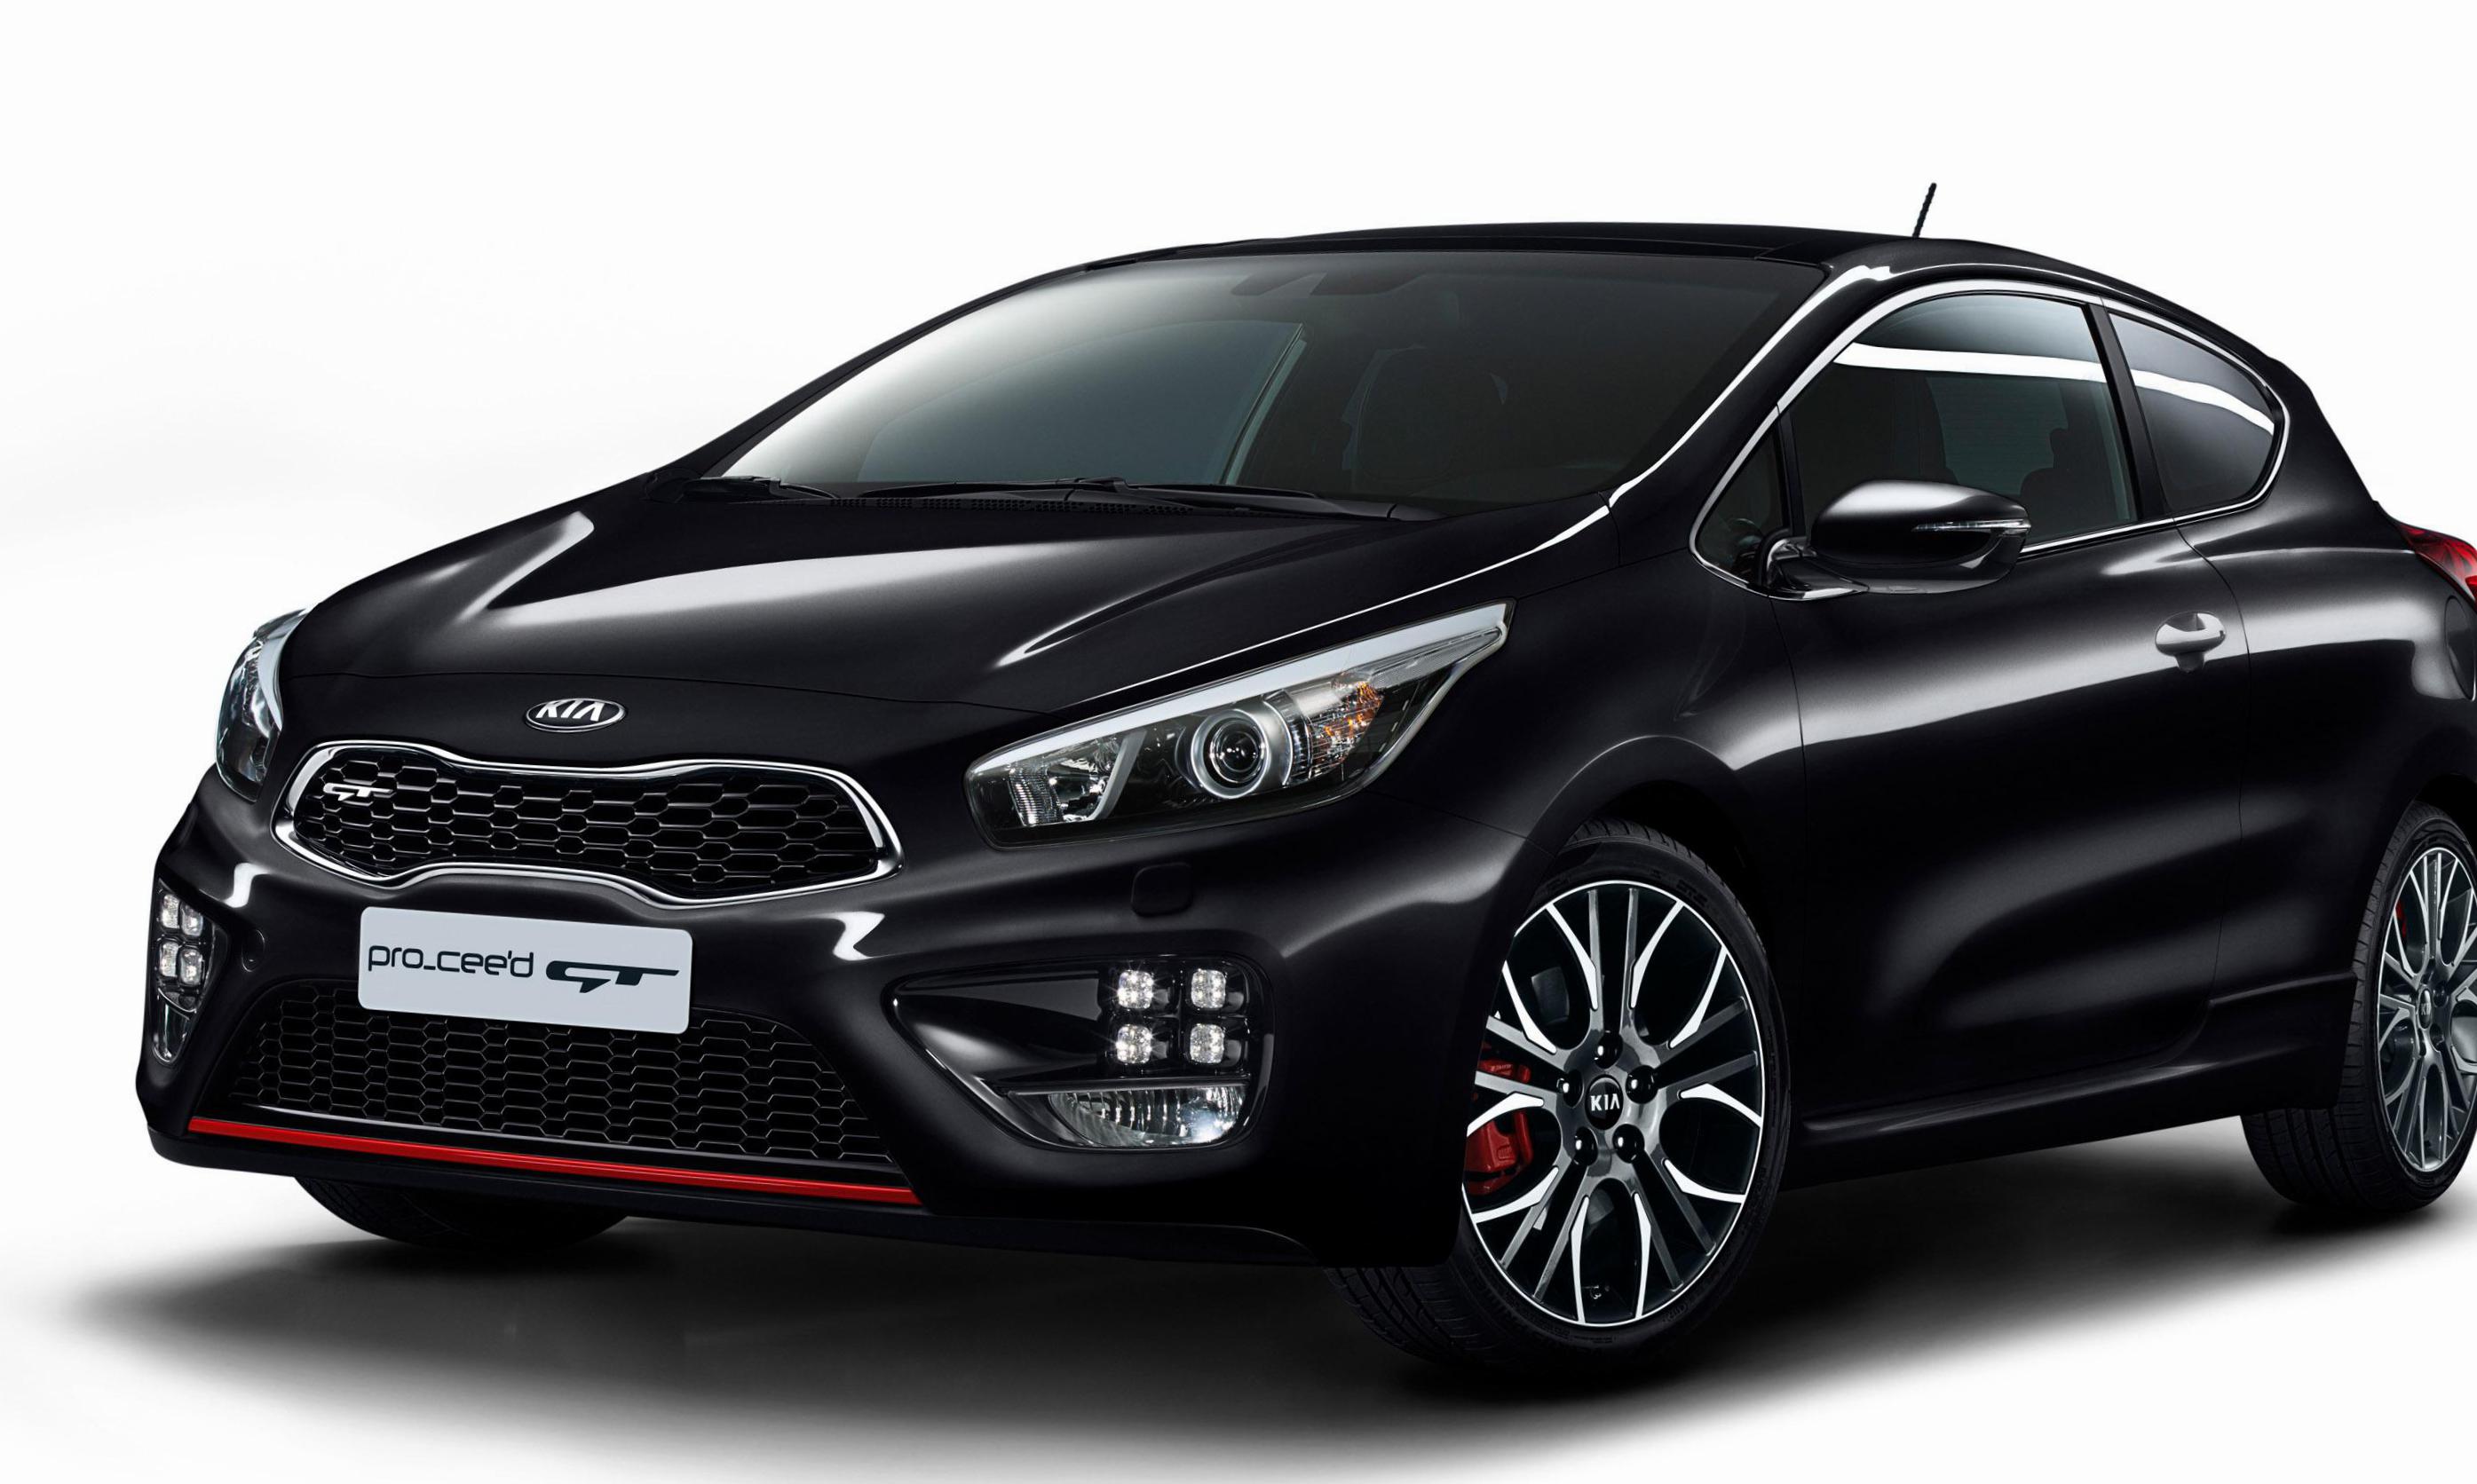 Pro Ceed GT KIA approved 2010